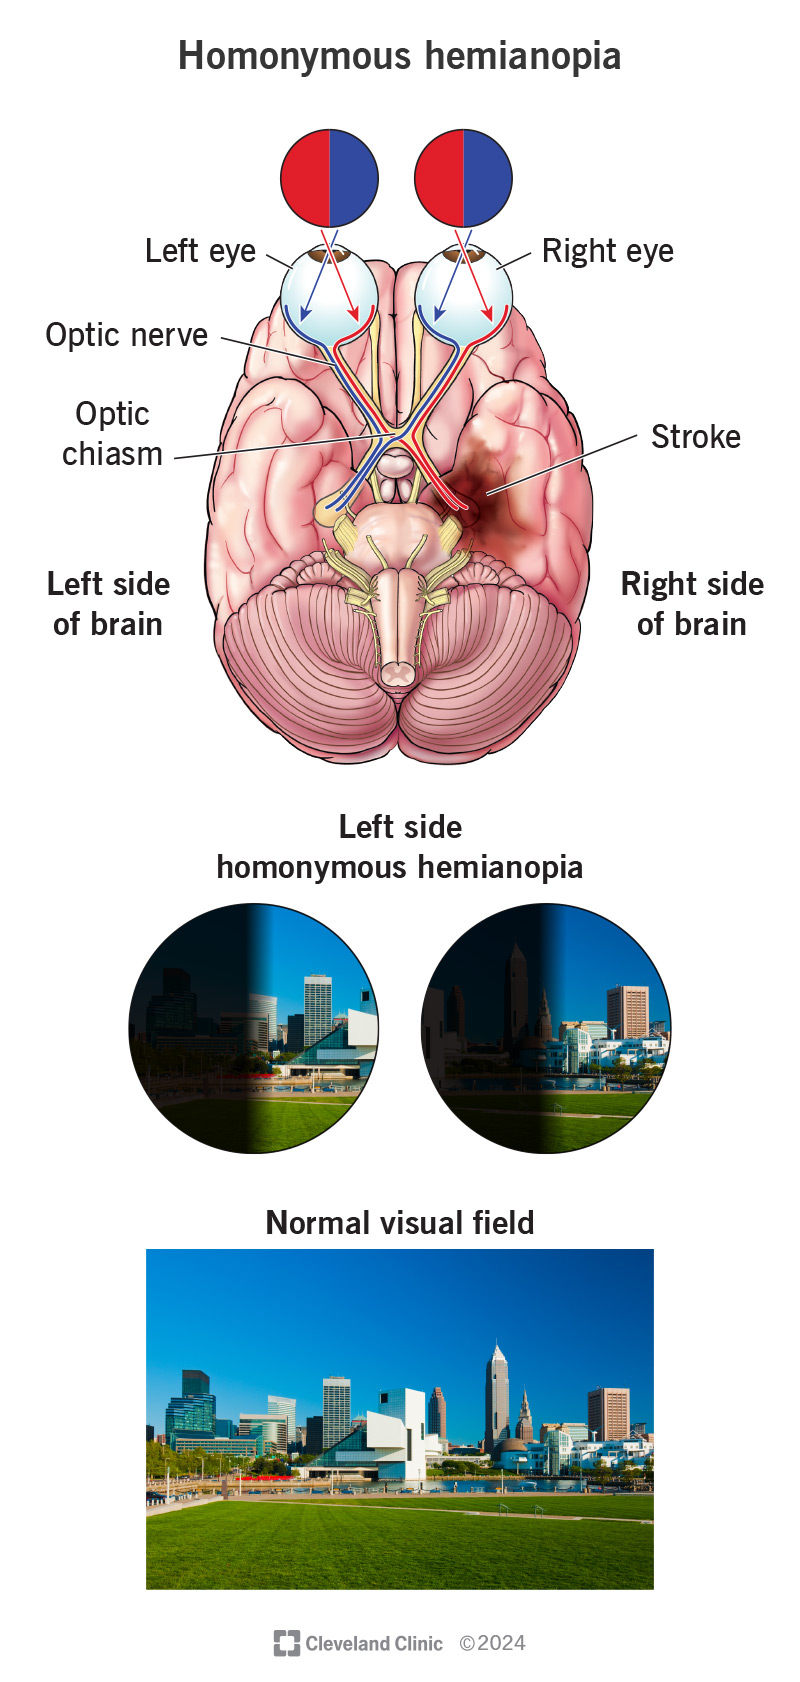 An infographic of how homonymous hemianopia causes vision loss on the same side of both eyes.